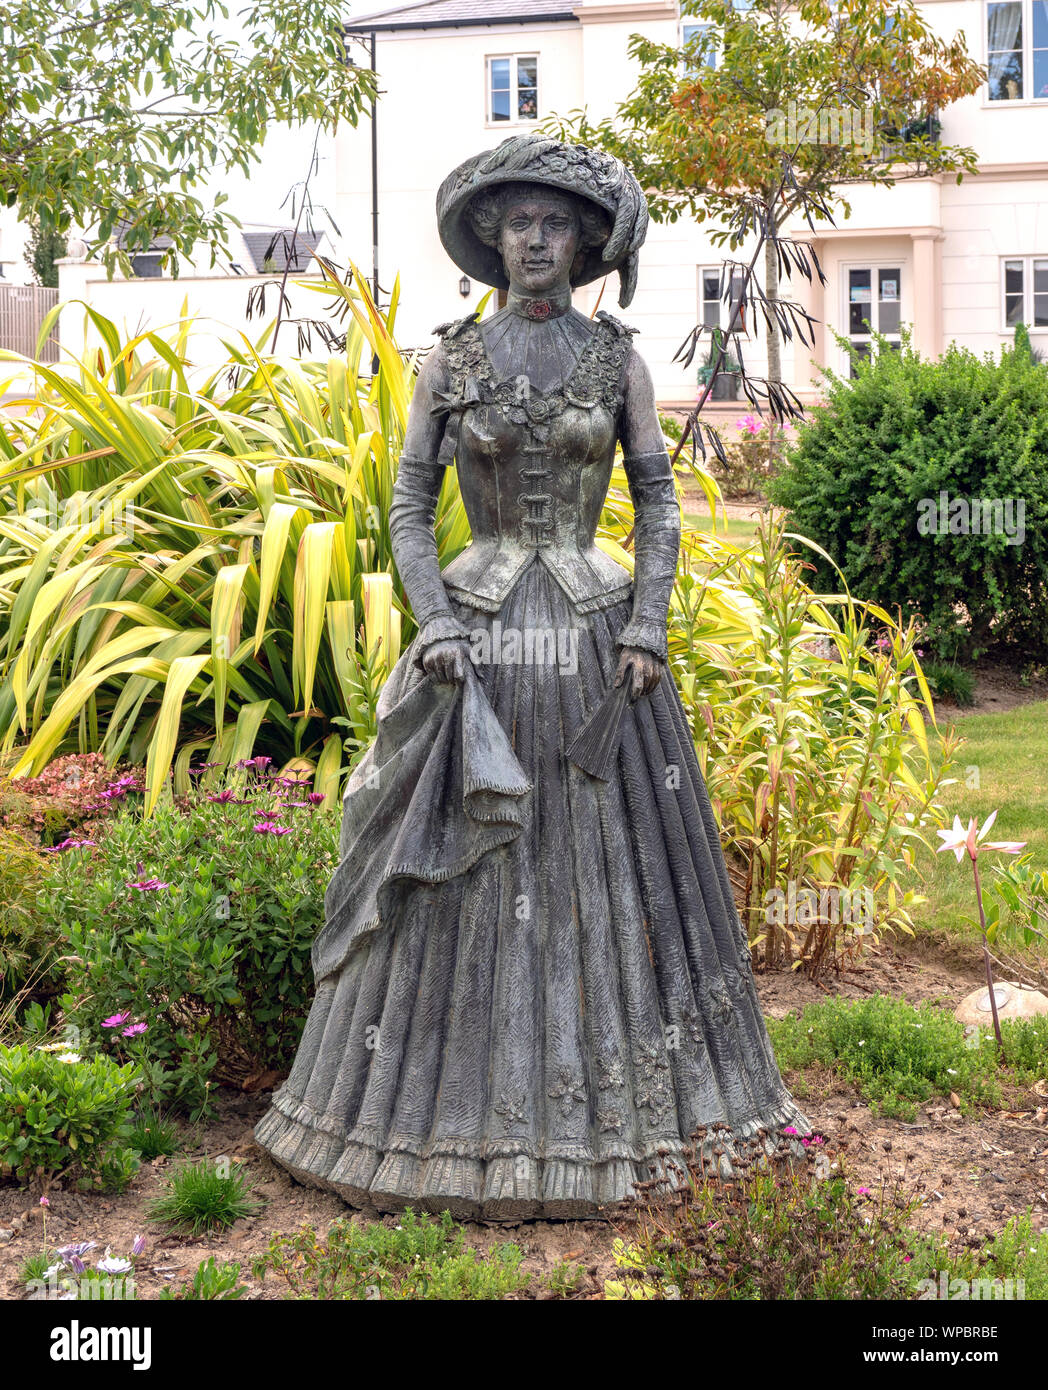 Lillie Langtry statue in Lillie Langtry Gardens, Jersey, Channel Islands. Stock Photo